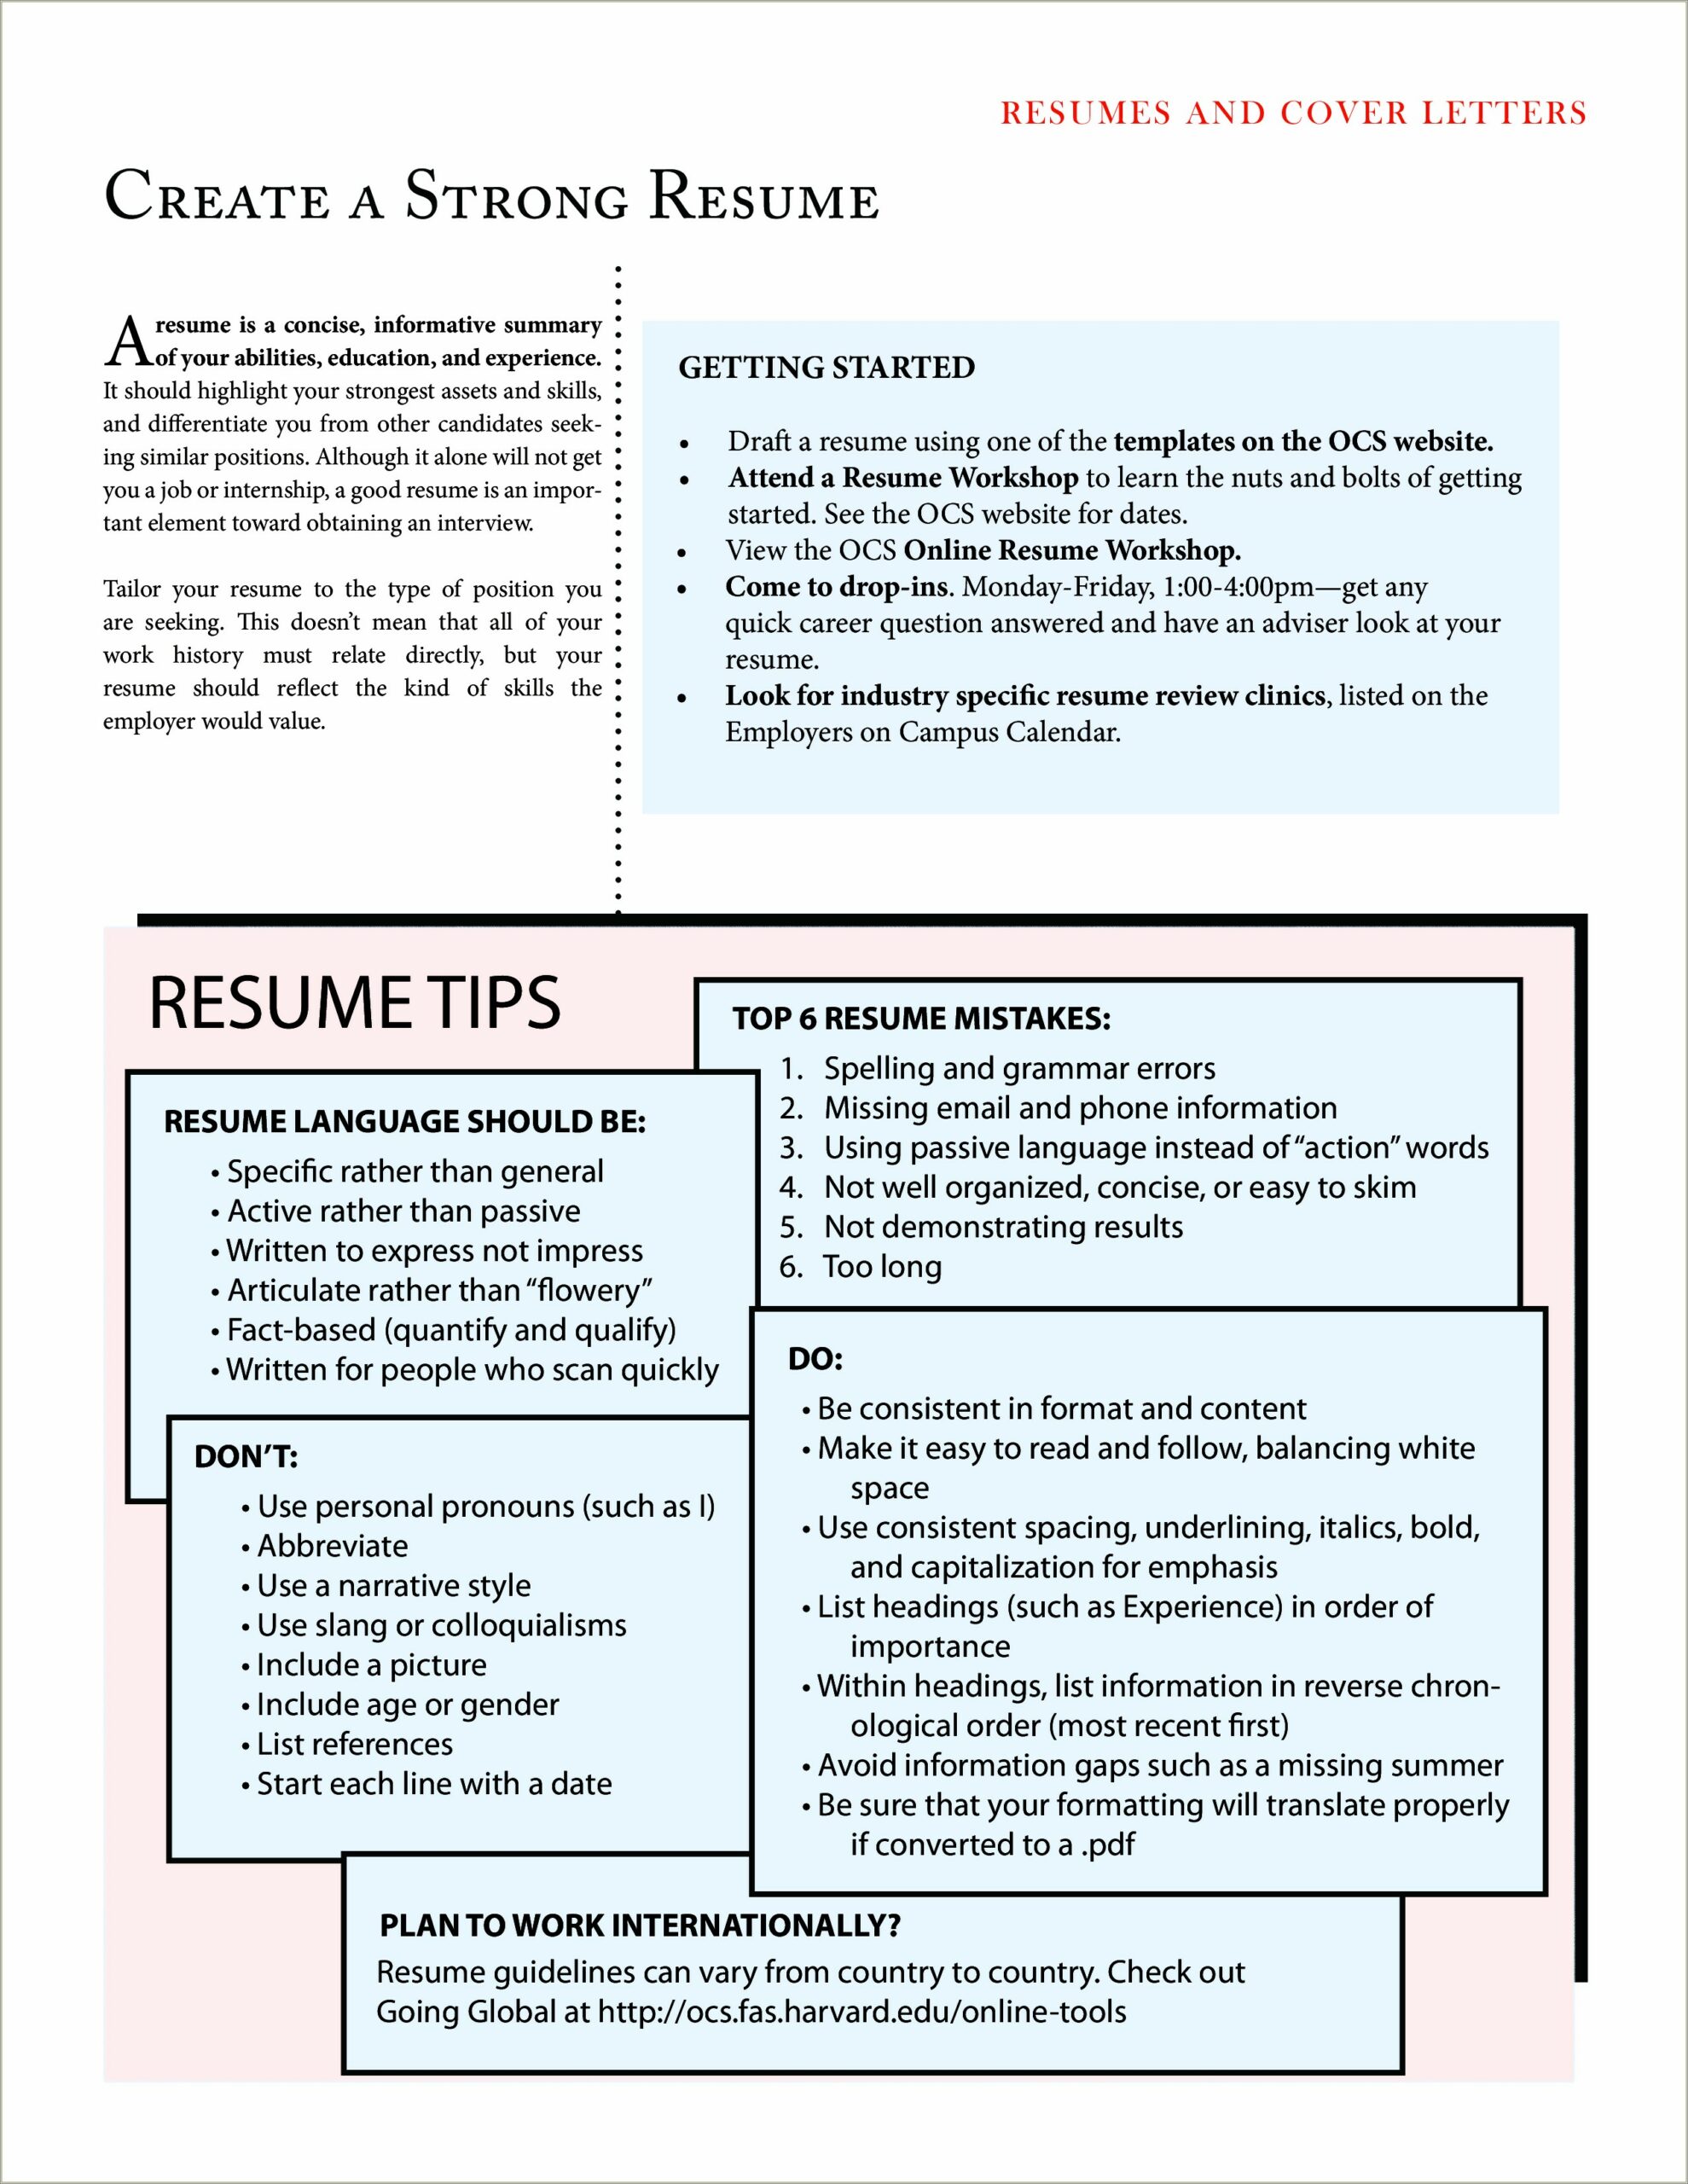 Create Your Resume Using General Templates